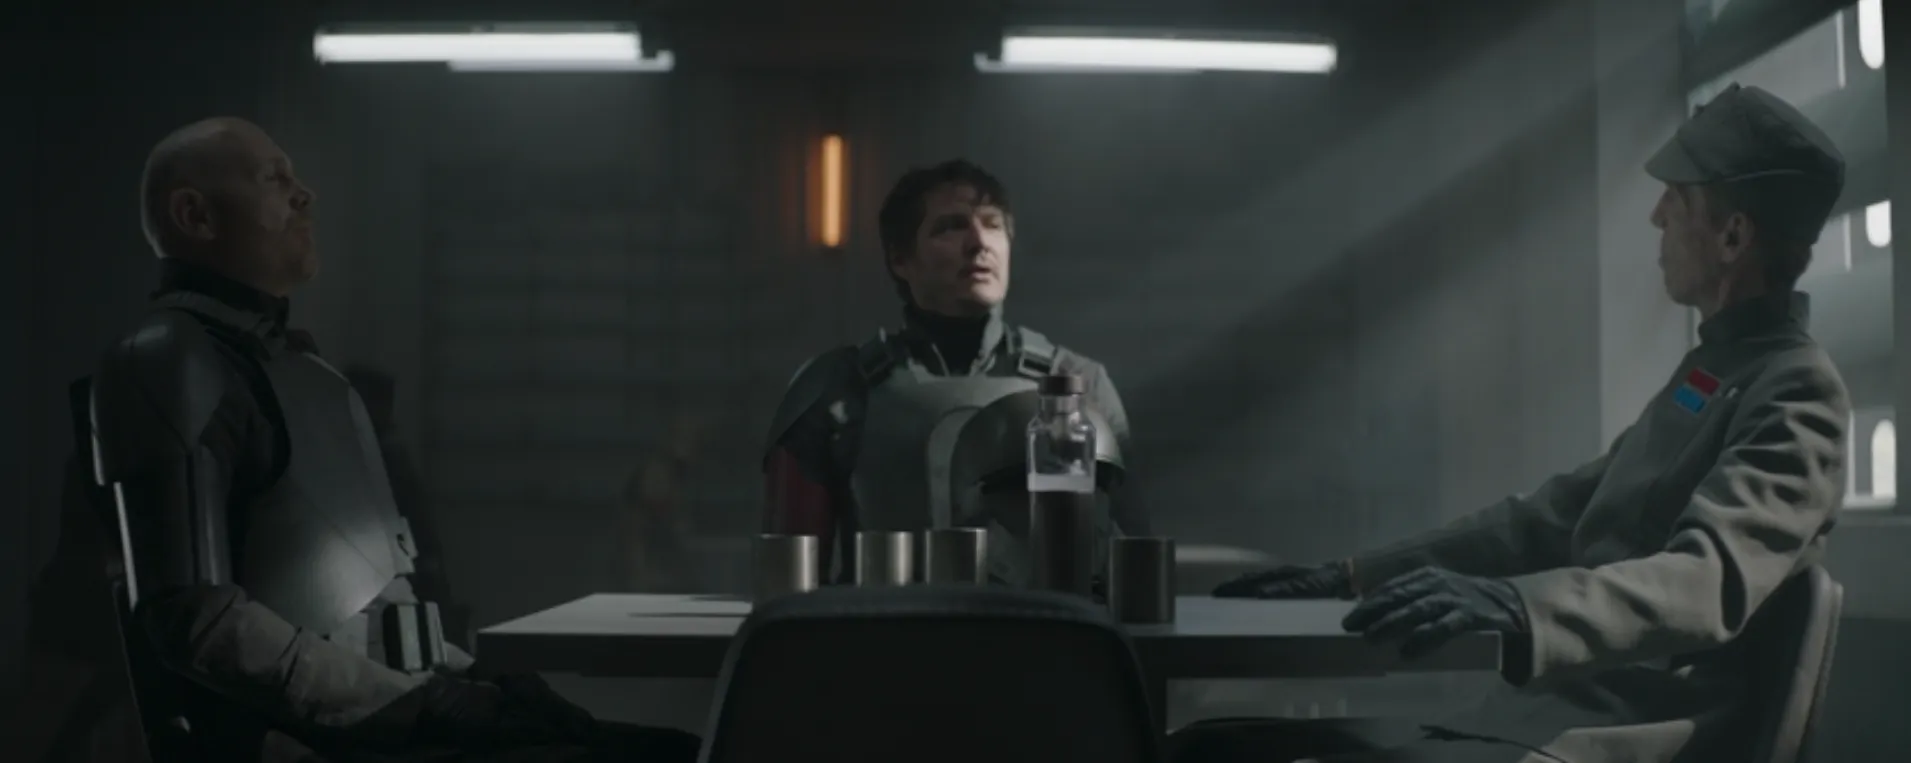 Din Djarin (Pedro Pascal), center, is seated at the center of the table facing the camera with Migs Mayfield (Bill Burr) on his right and an Imperial officer, Valin Hess (Richard Brake) on his left. 